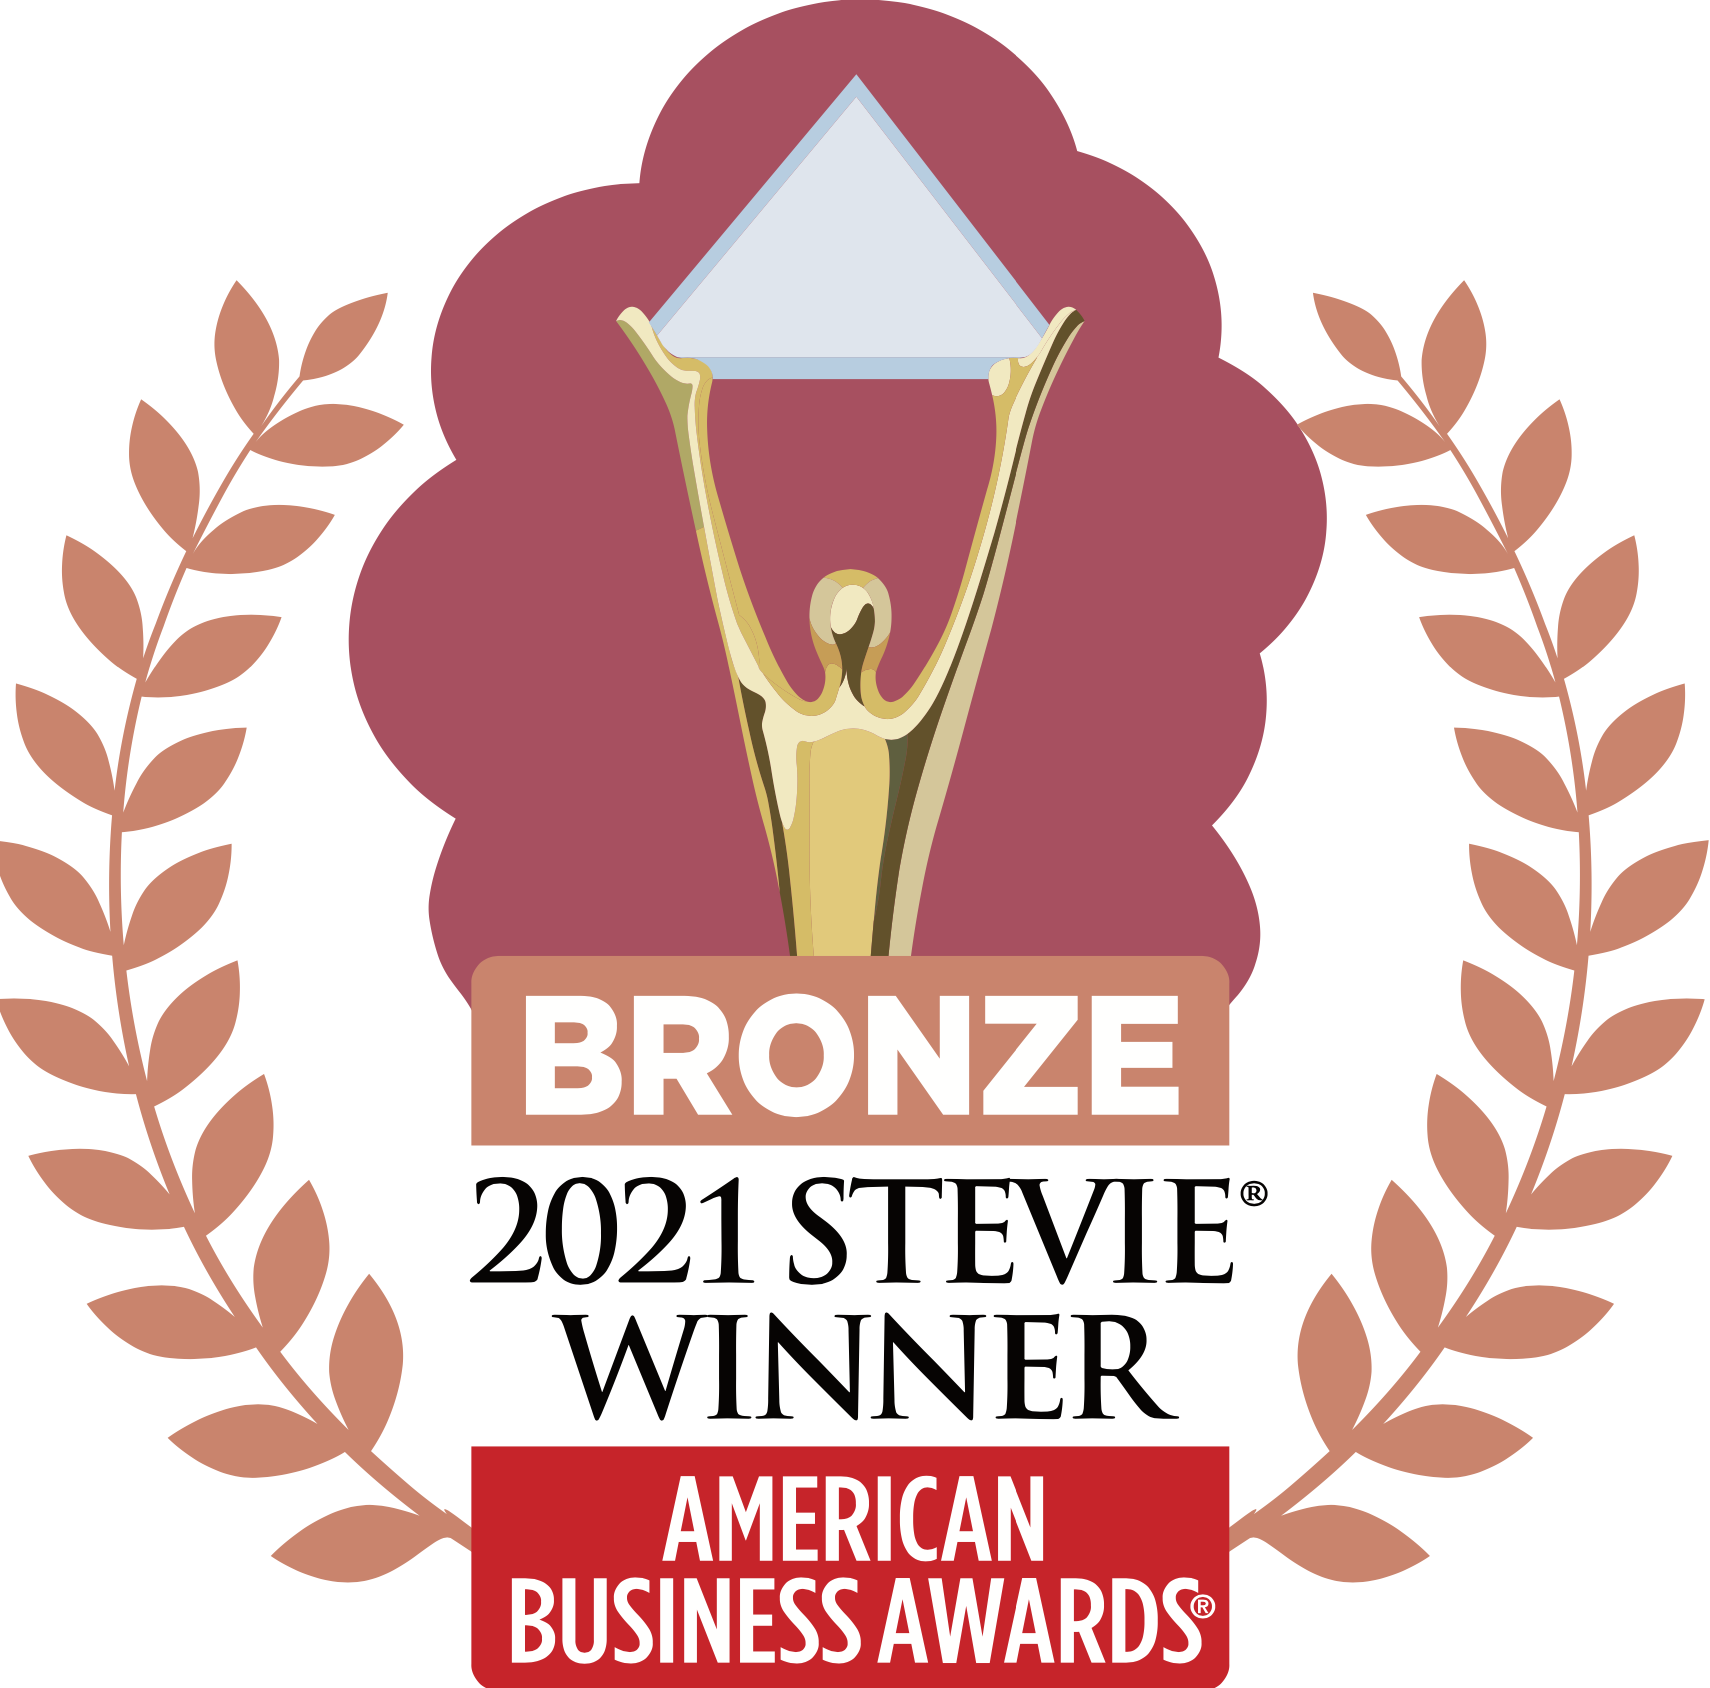 [Award] Smarten Spaces is proud to clinch 2 Bronze Stevie® Awards